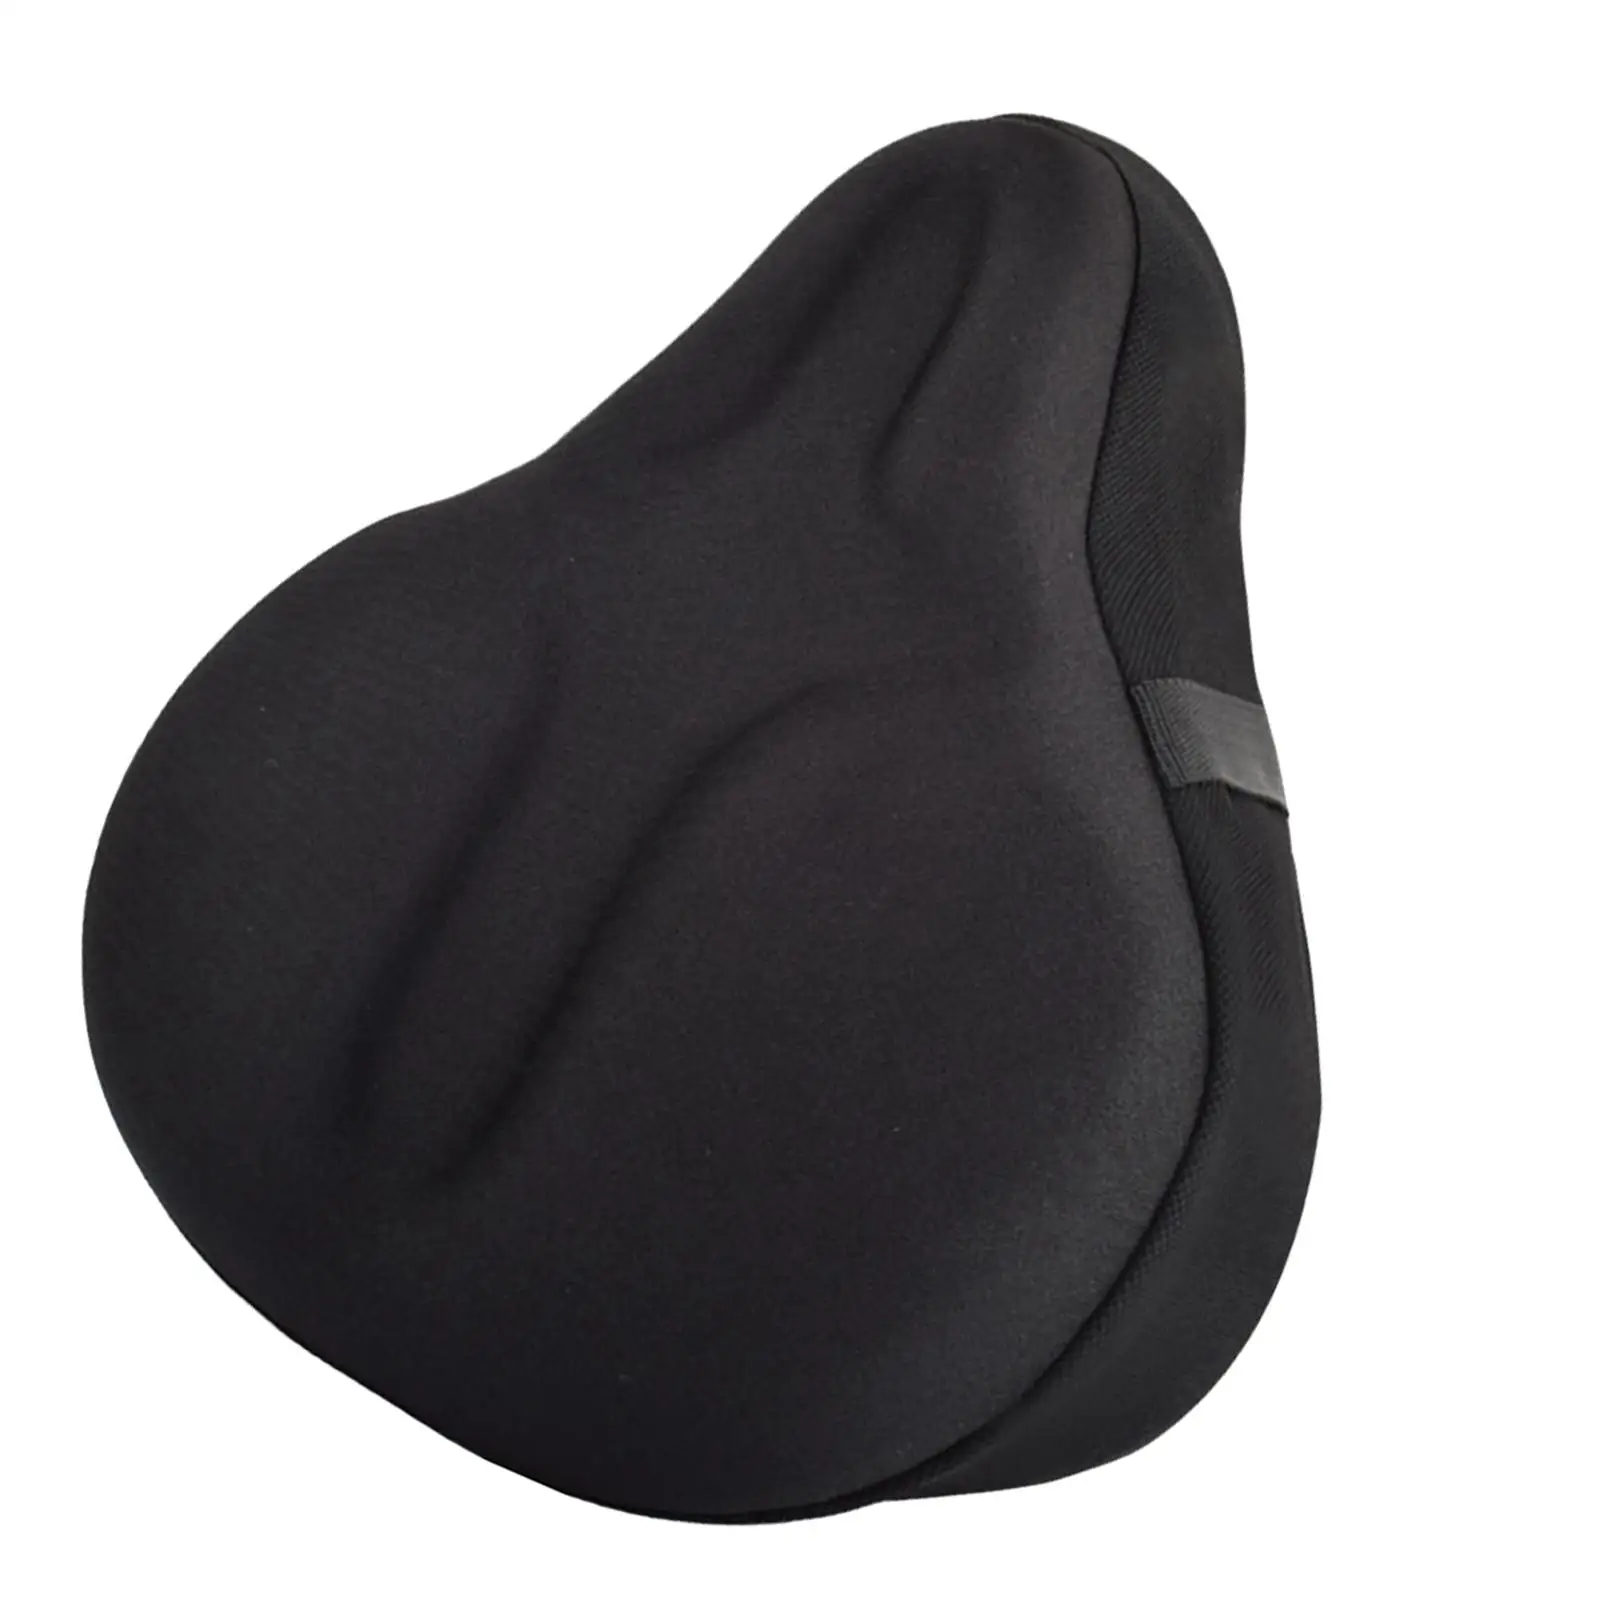 Gel Bike Seat   Saddle  Foam Breathable Silicone Seat Cover for Mountain Road Bike Exercise Bike Outdoor Cycling Riding